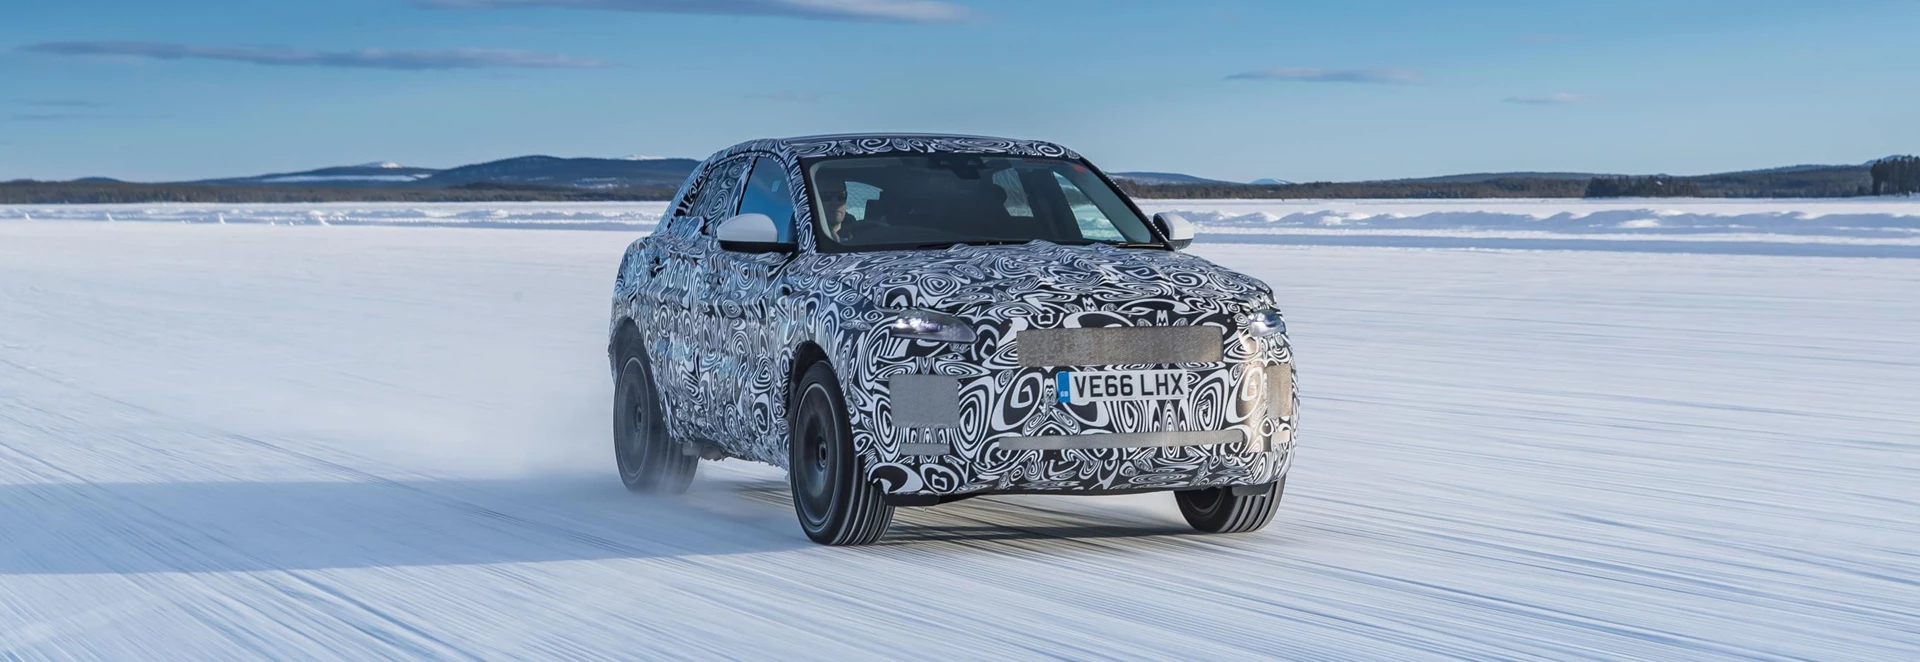 Jaguar puts its new E-PACE to the test 